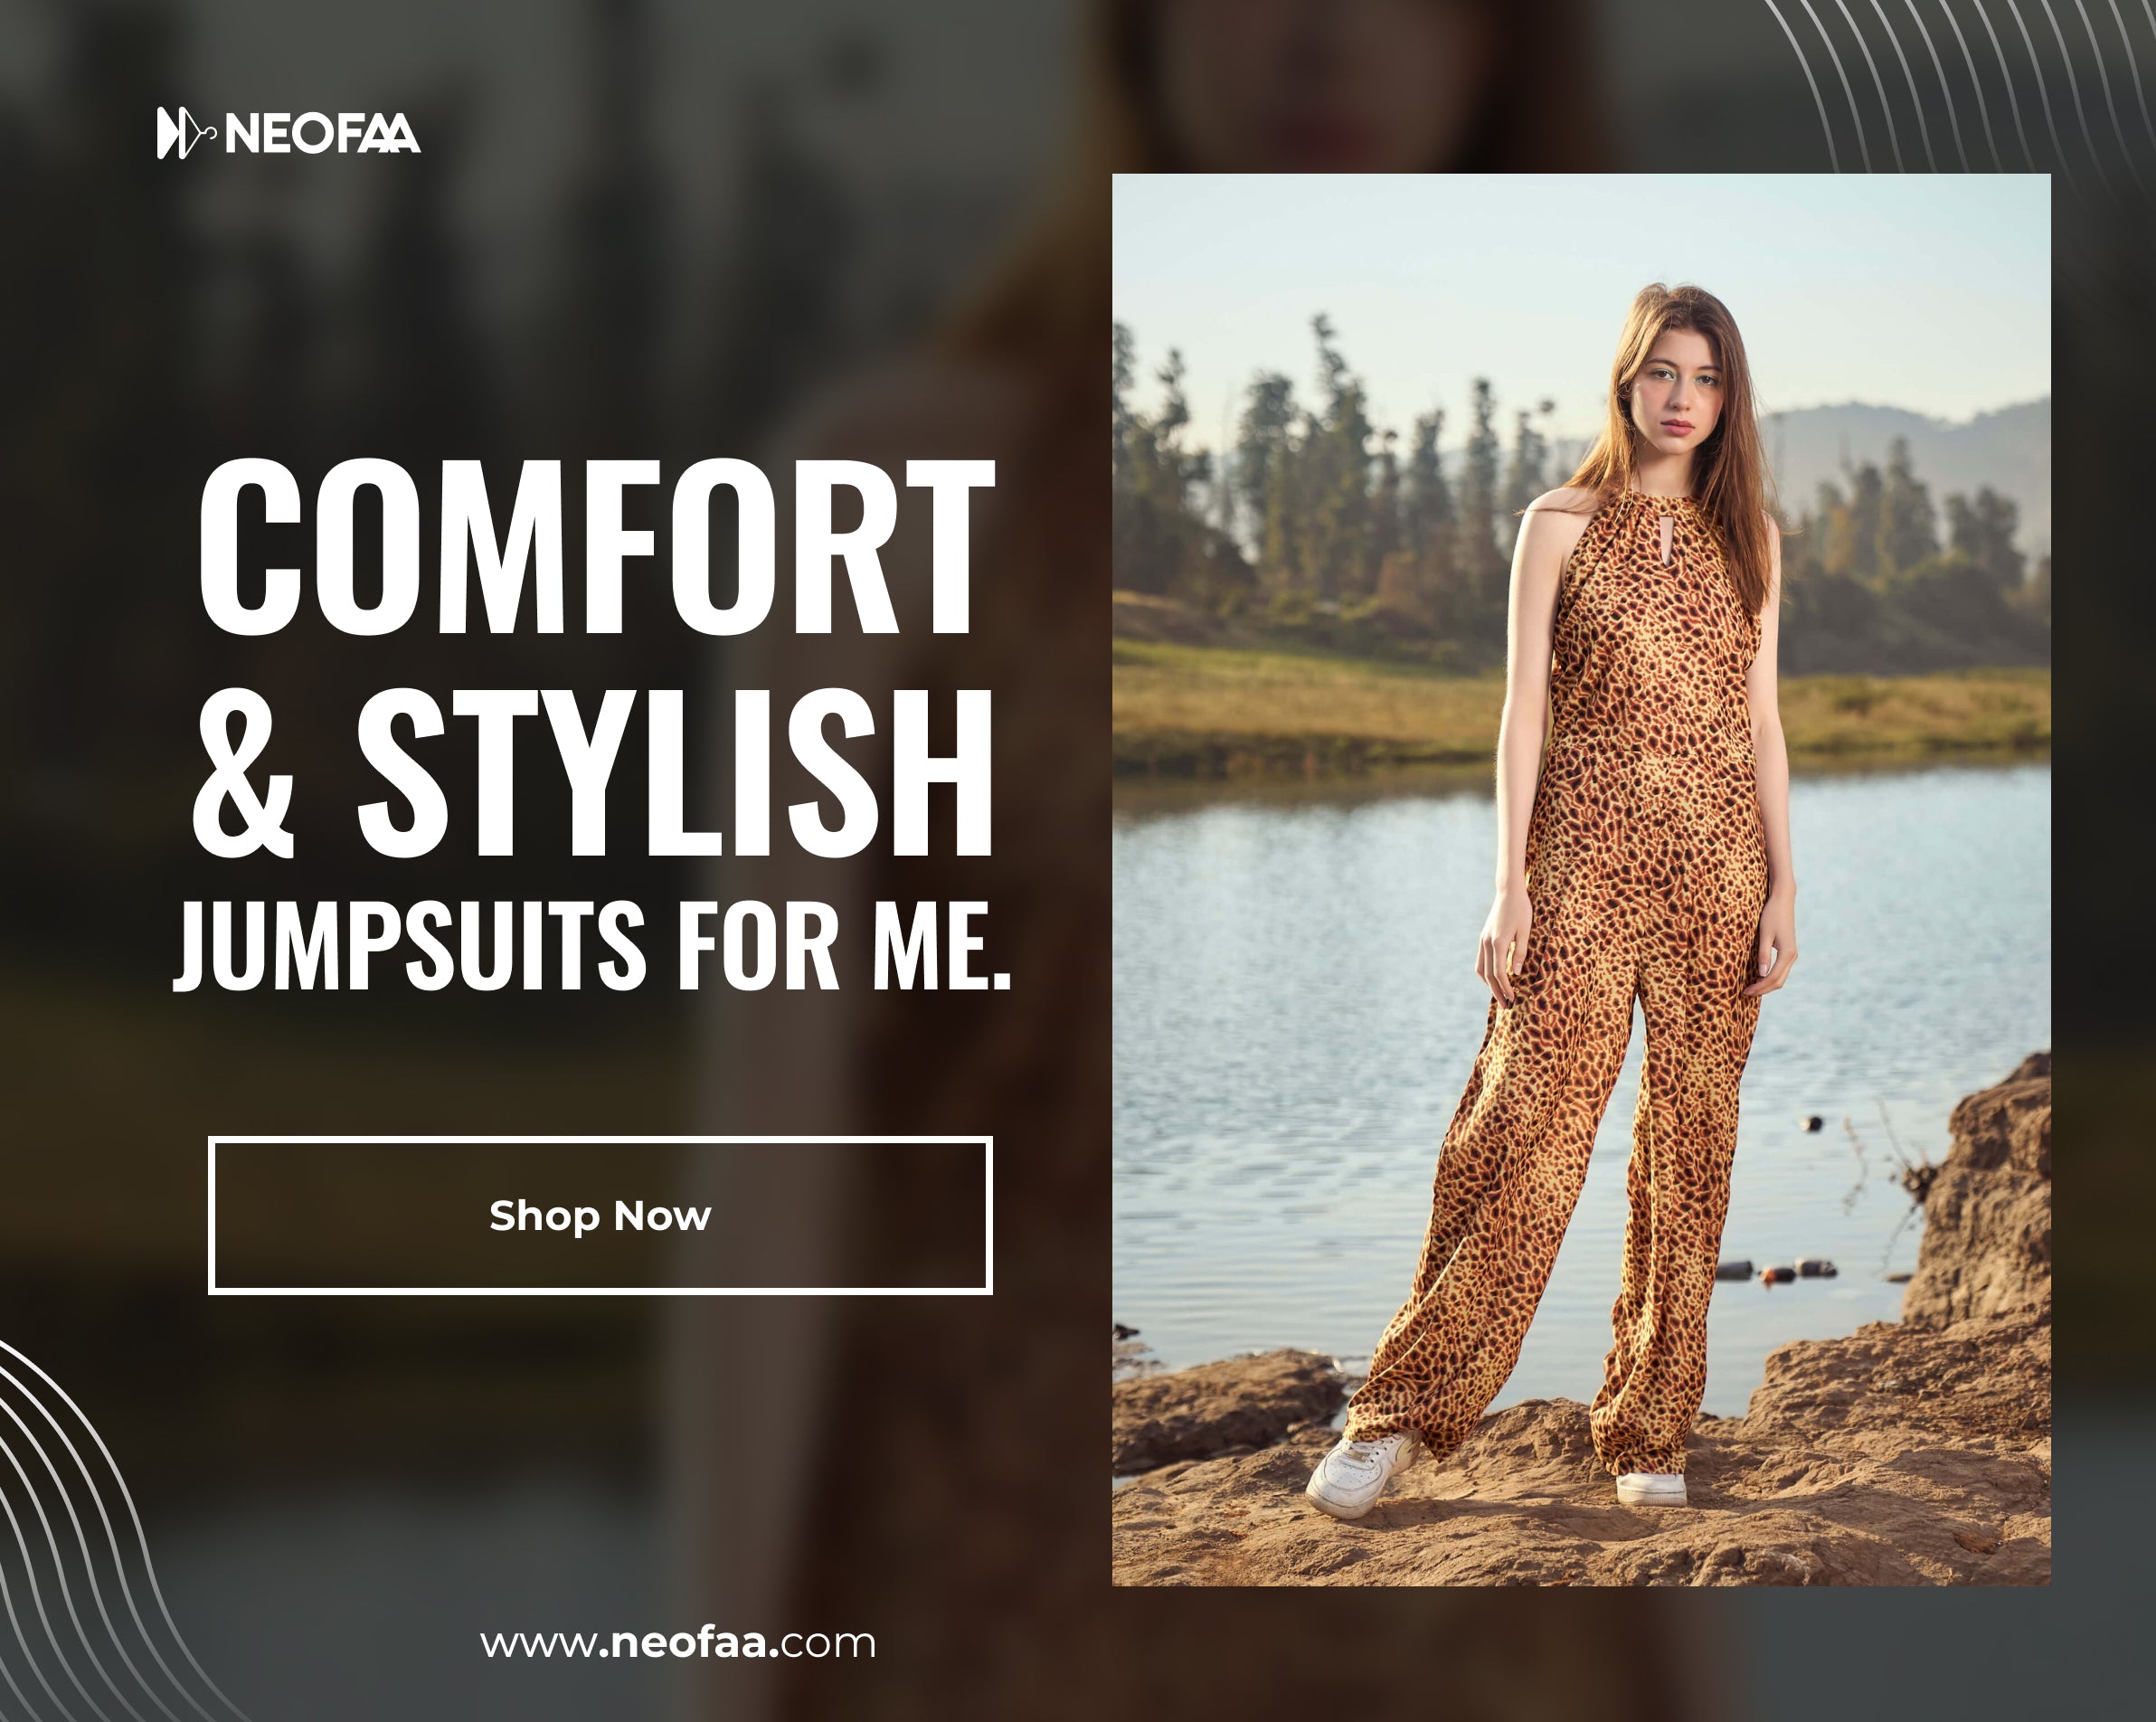 Comfort & Stylish Jumpsuits for me!